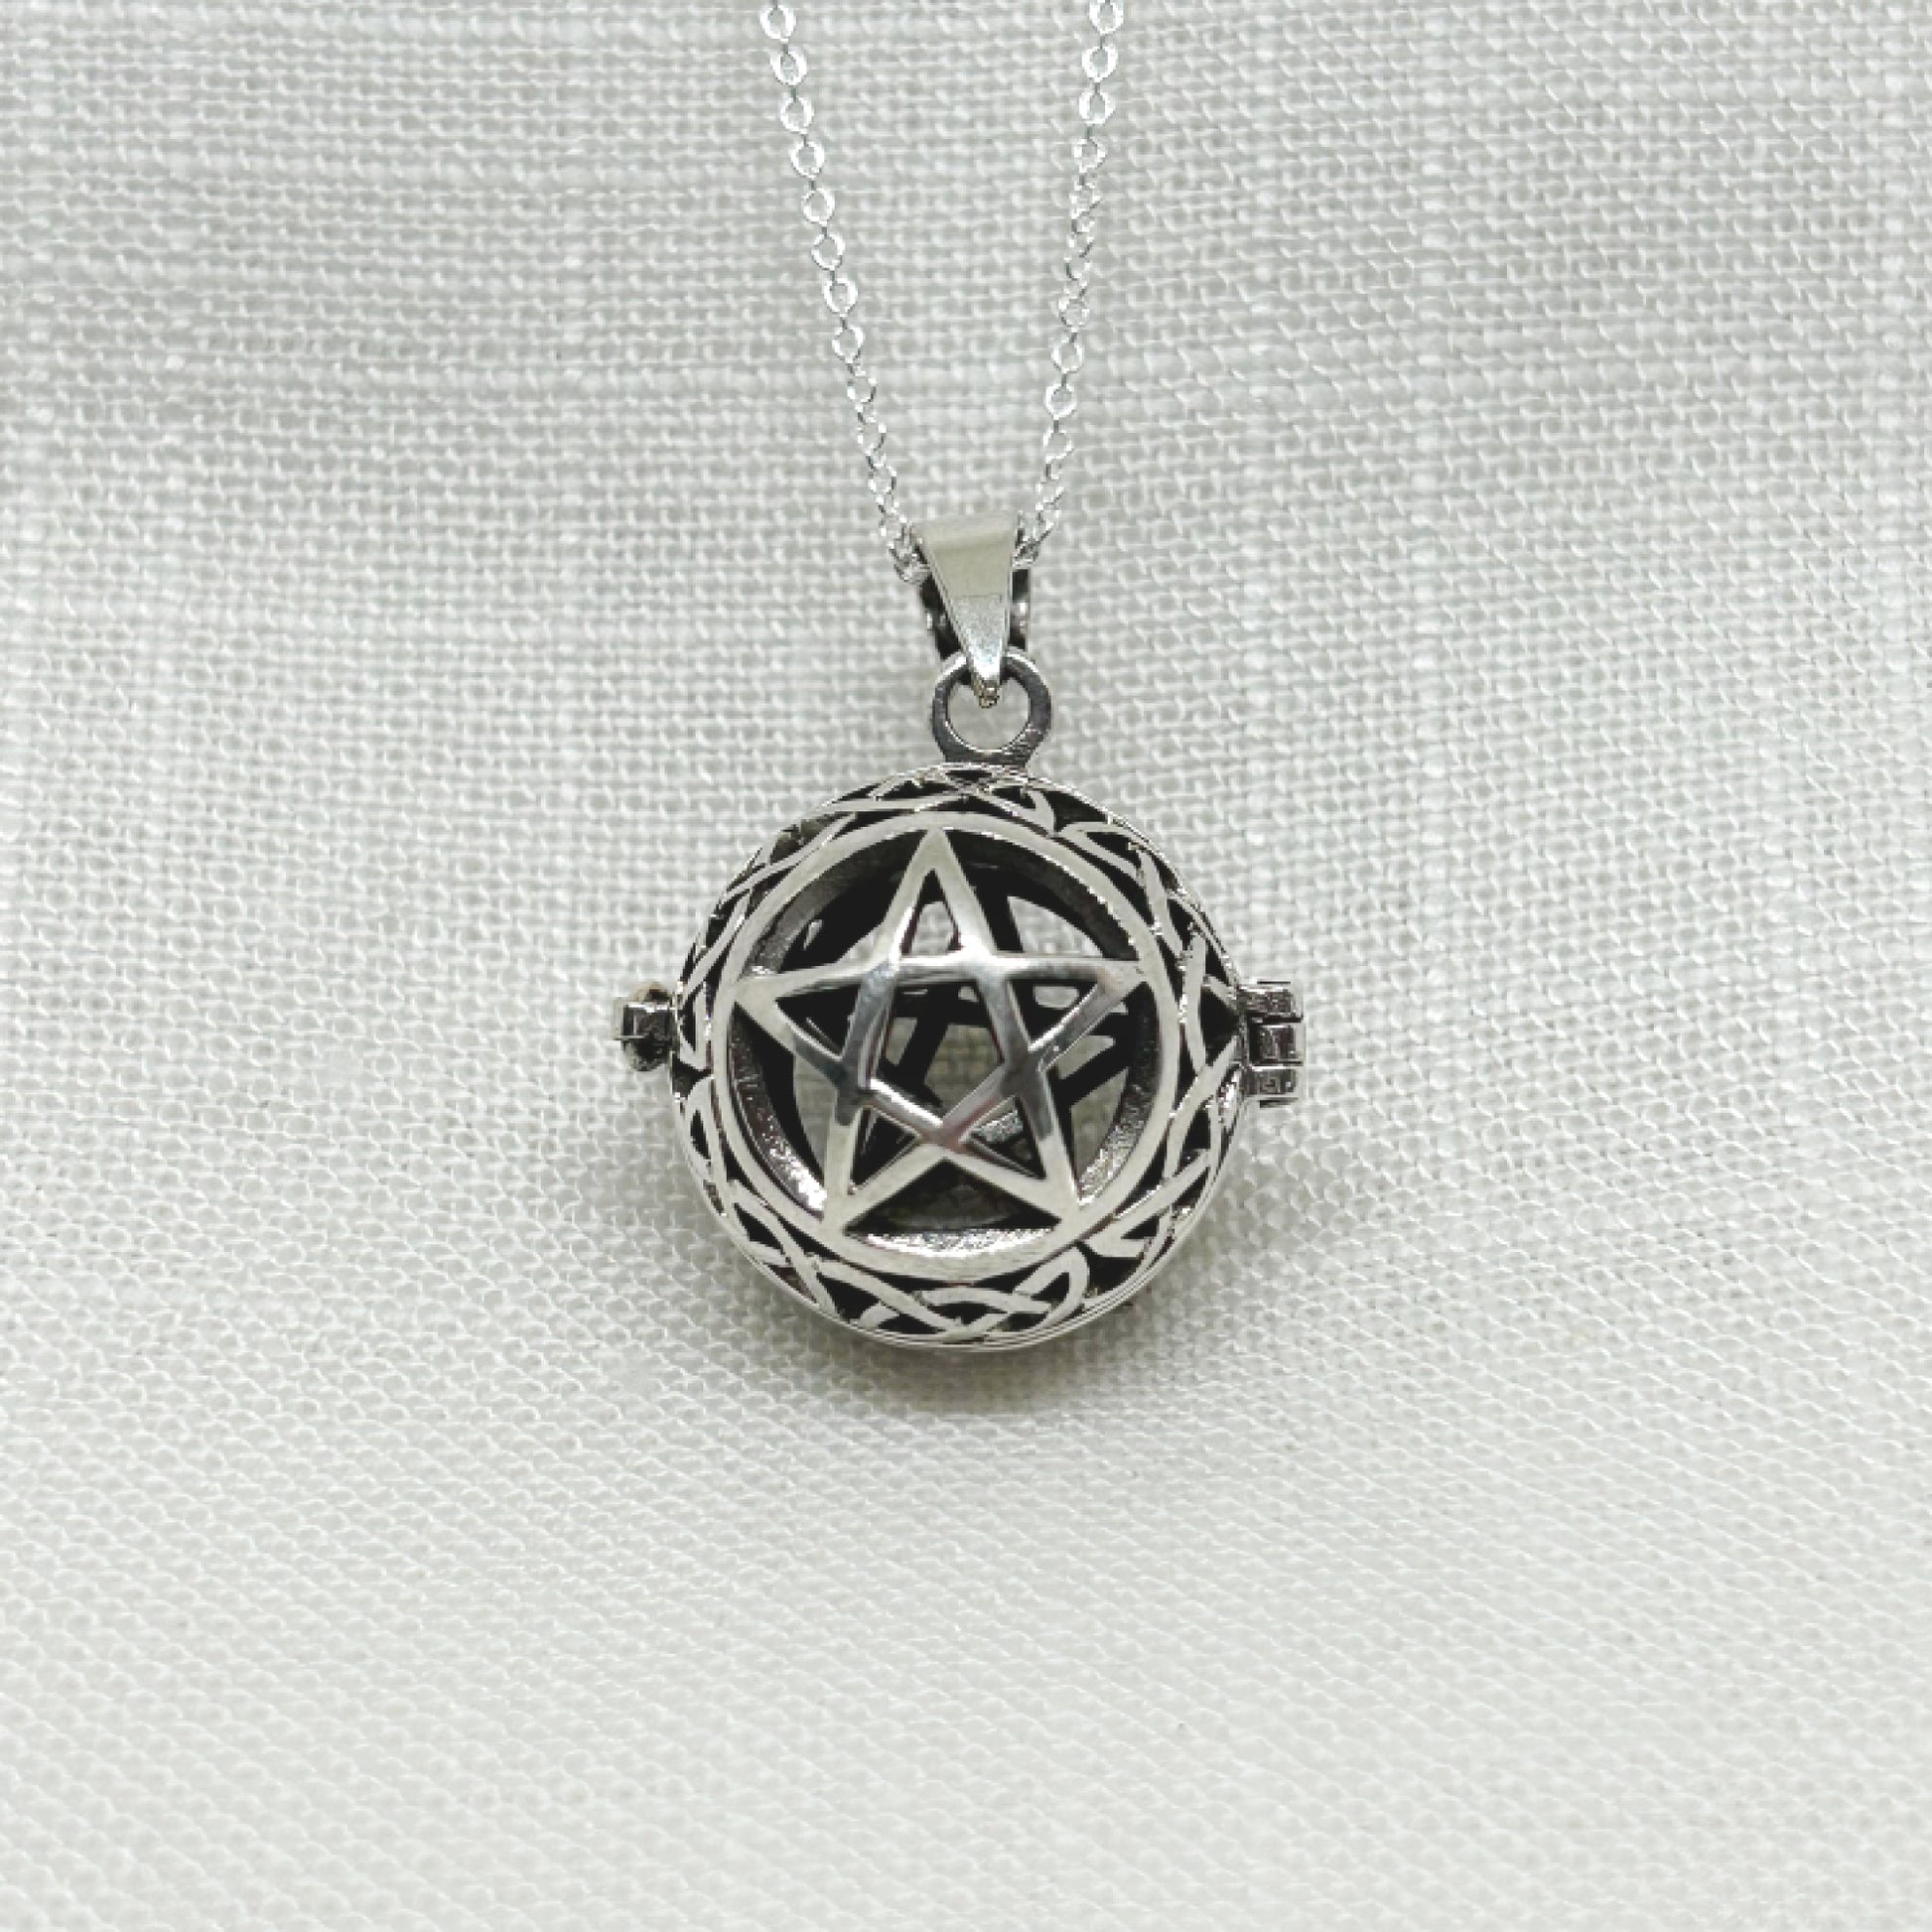 This heavy weight locket is fully functional for keeping your favourite crystals or keepsakes on you. Featuring a beautiful Celtic style pattern around the outside of the pentacle on the front and back. A good, sturdy clasp will also keep it securely closed. All pendants come supplied on an 20" Sterling Silver Curb Chain and are gift boxed. Size: 2.2cm external diameter. Weight: 8.85g